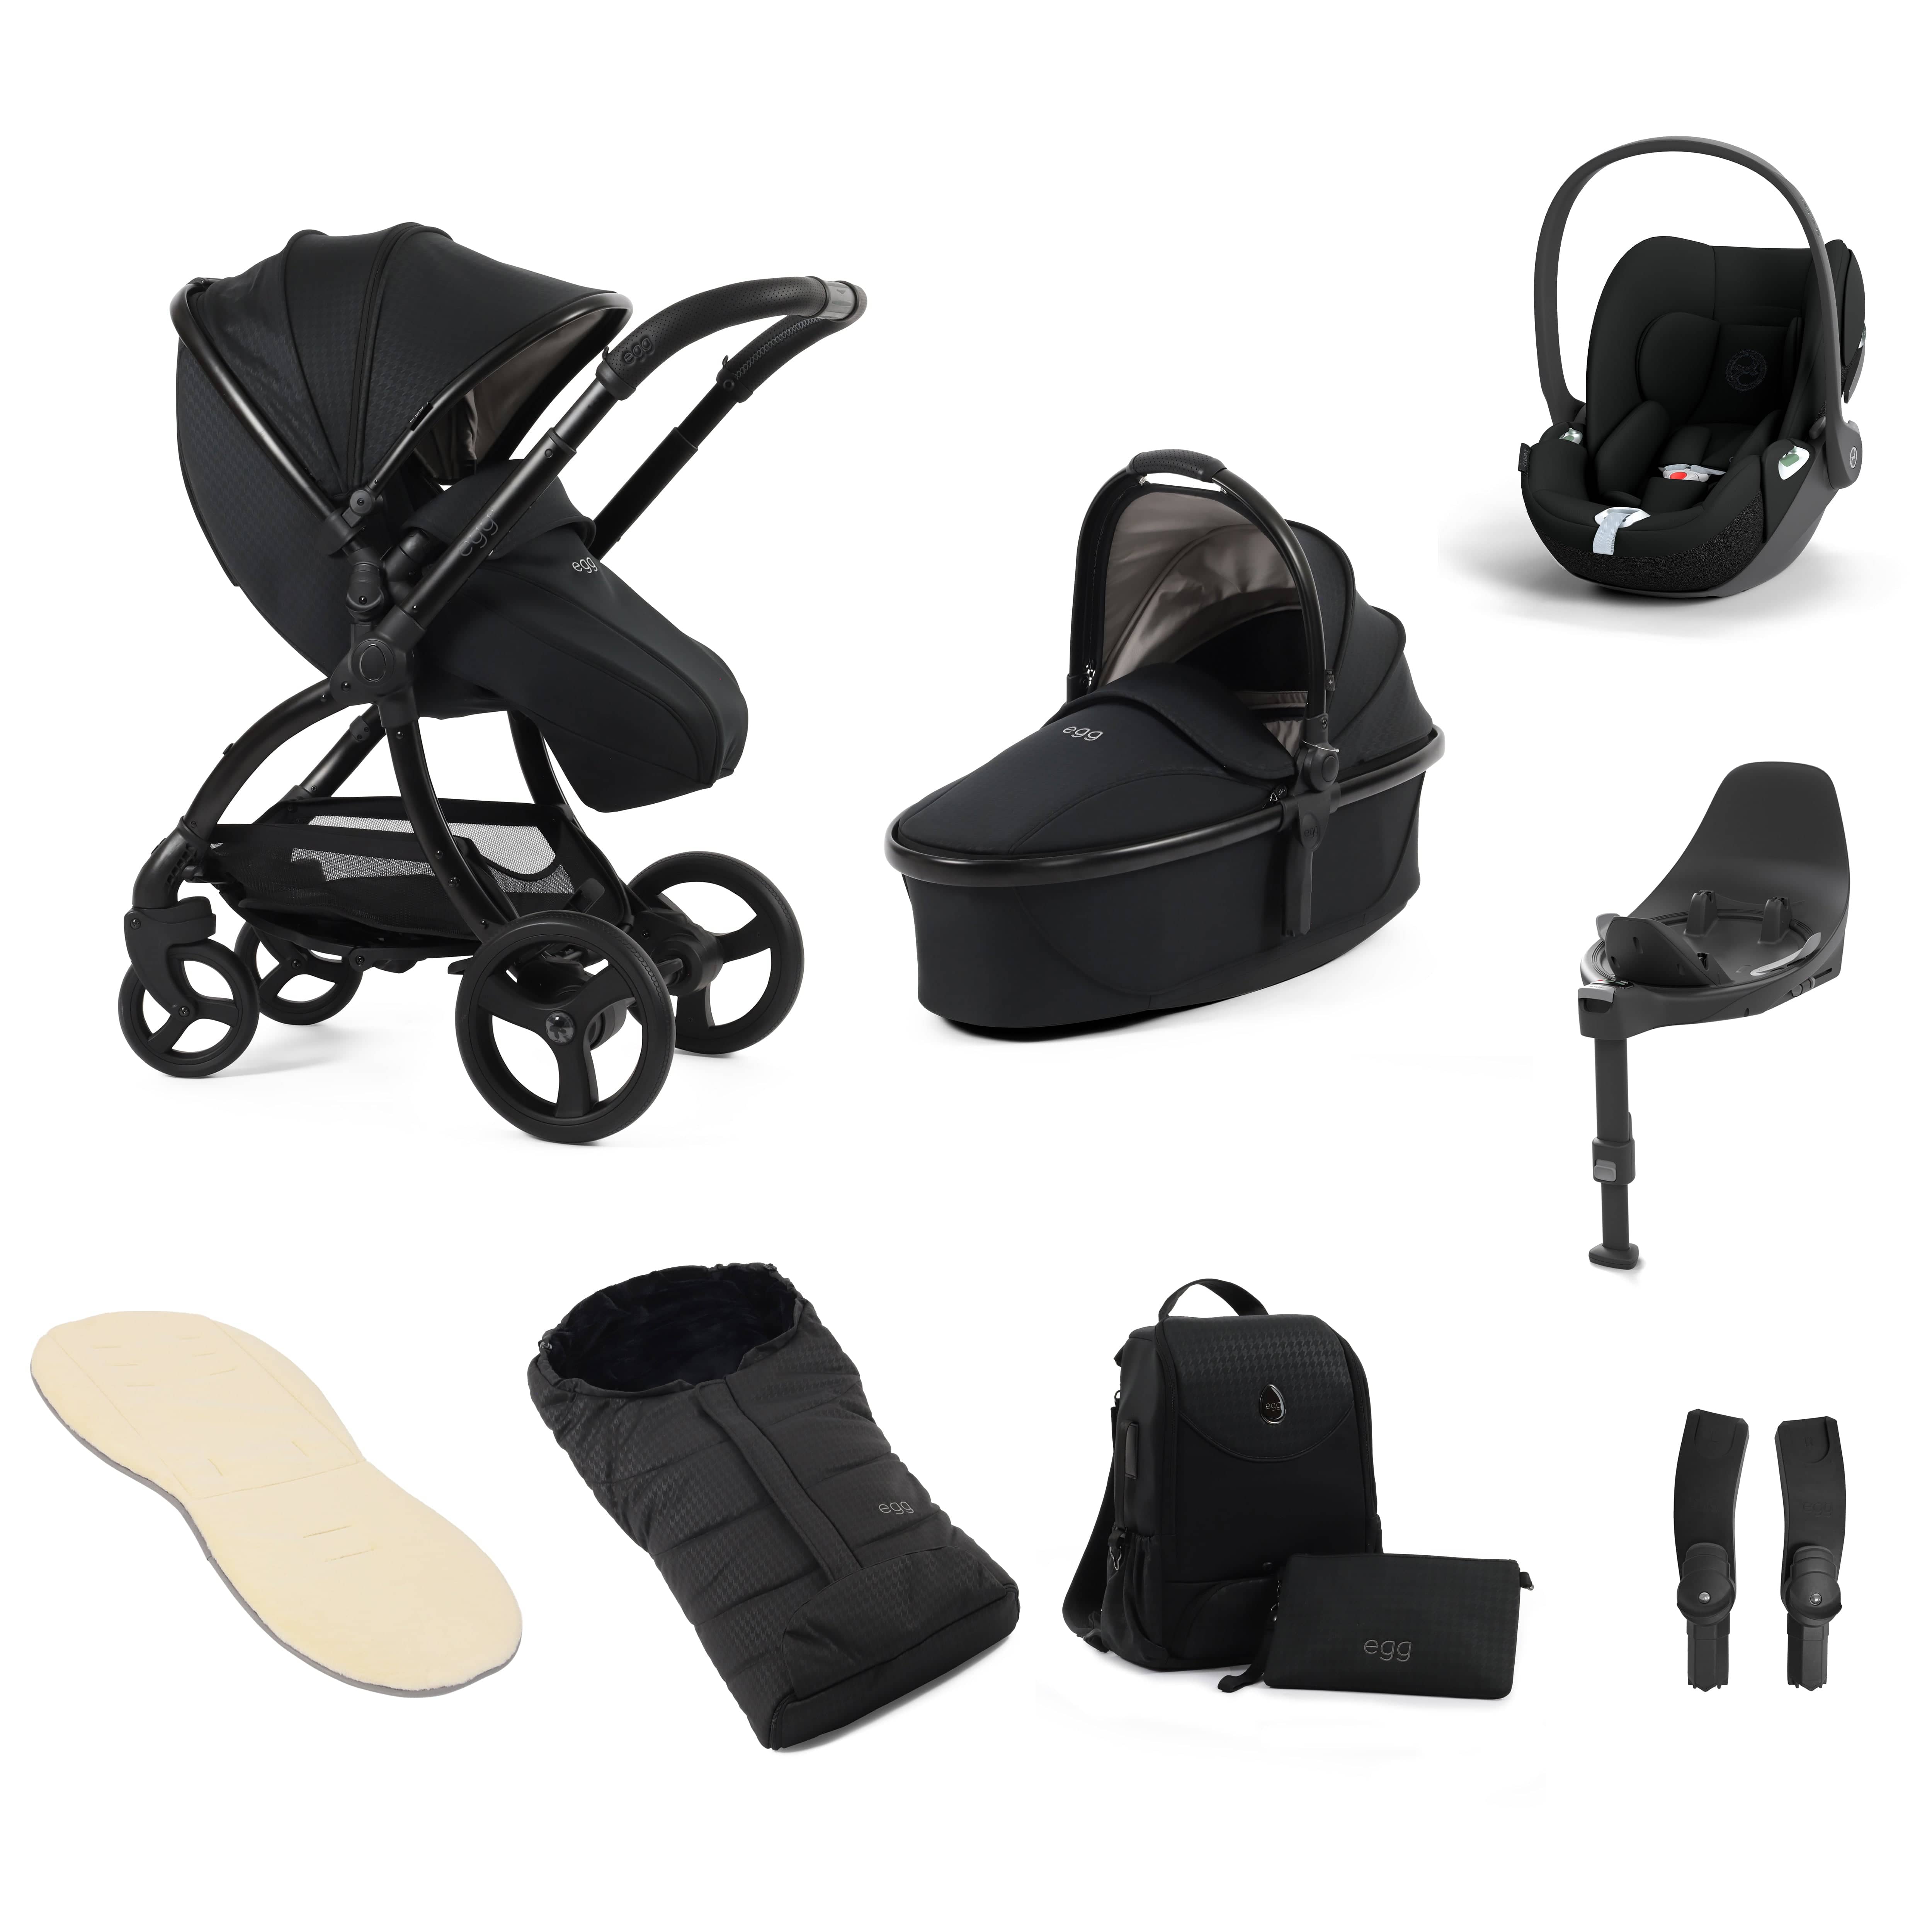 egg3 Luxury Travel System Bundle Special Edition Houndstooth Black Baby Prams 14704-HTB 5060711567853